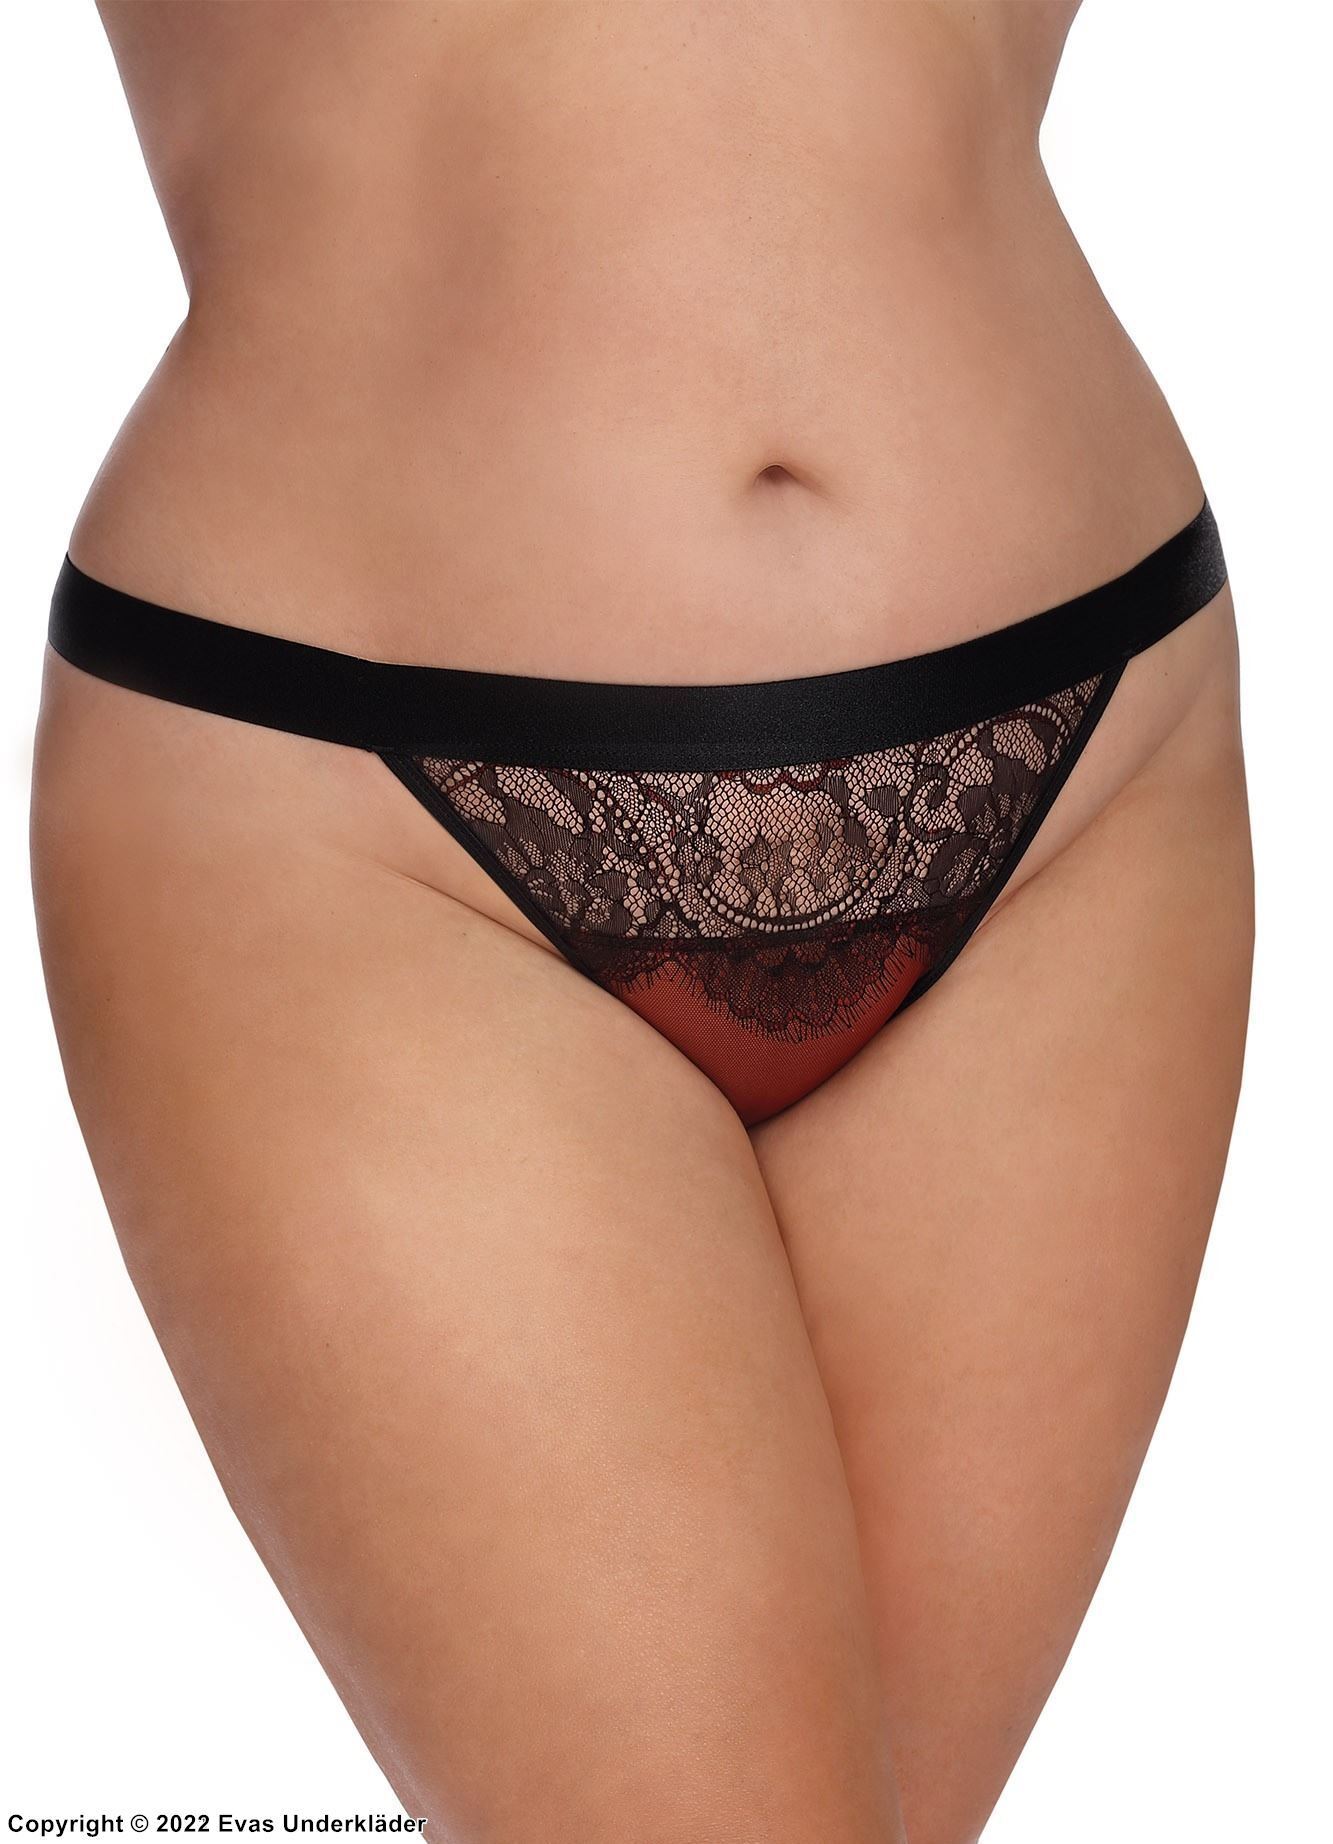 Romantic cheeky panties, tulle, lace inlay, sheer back, plus size